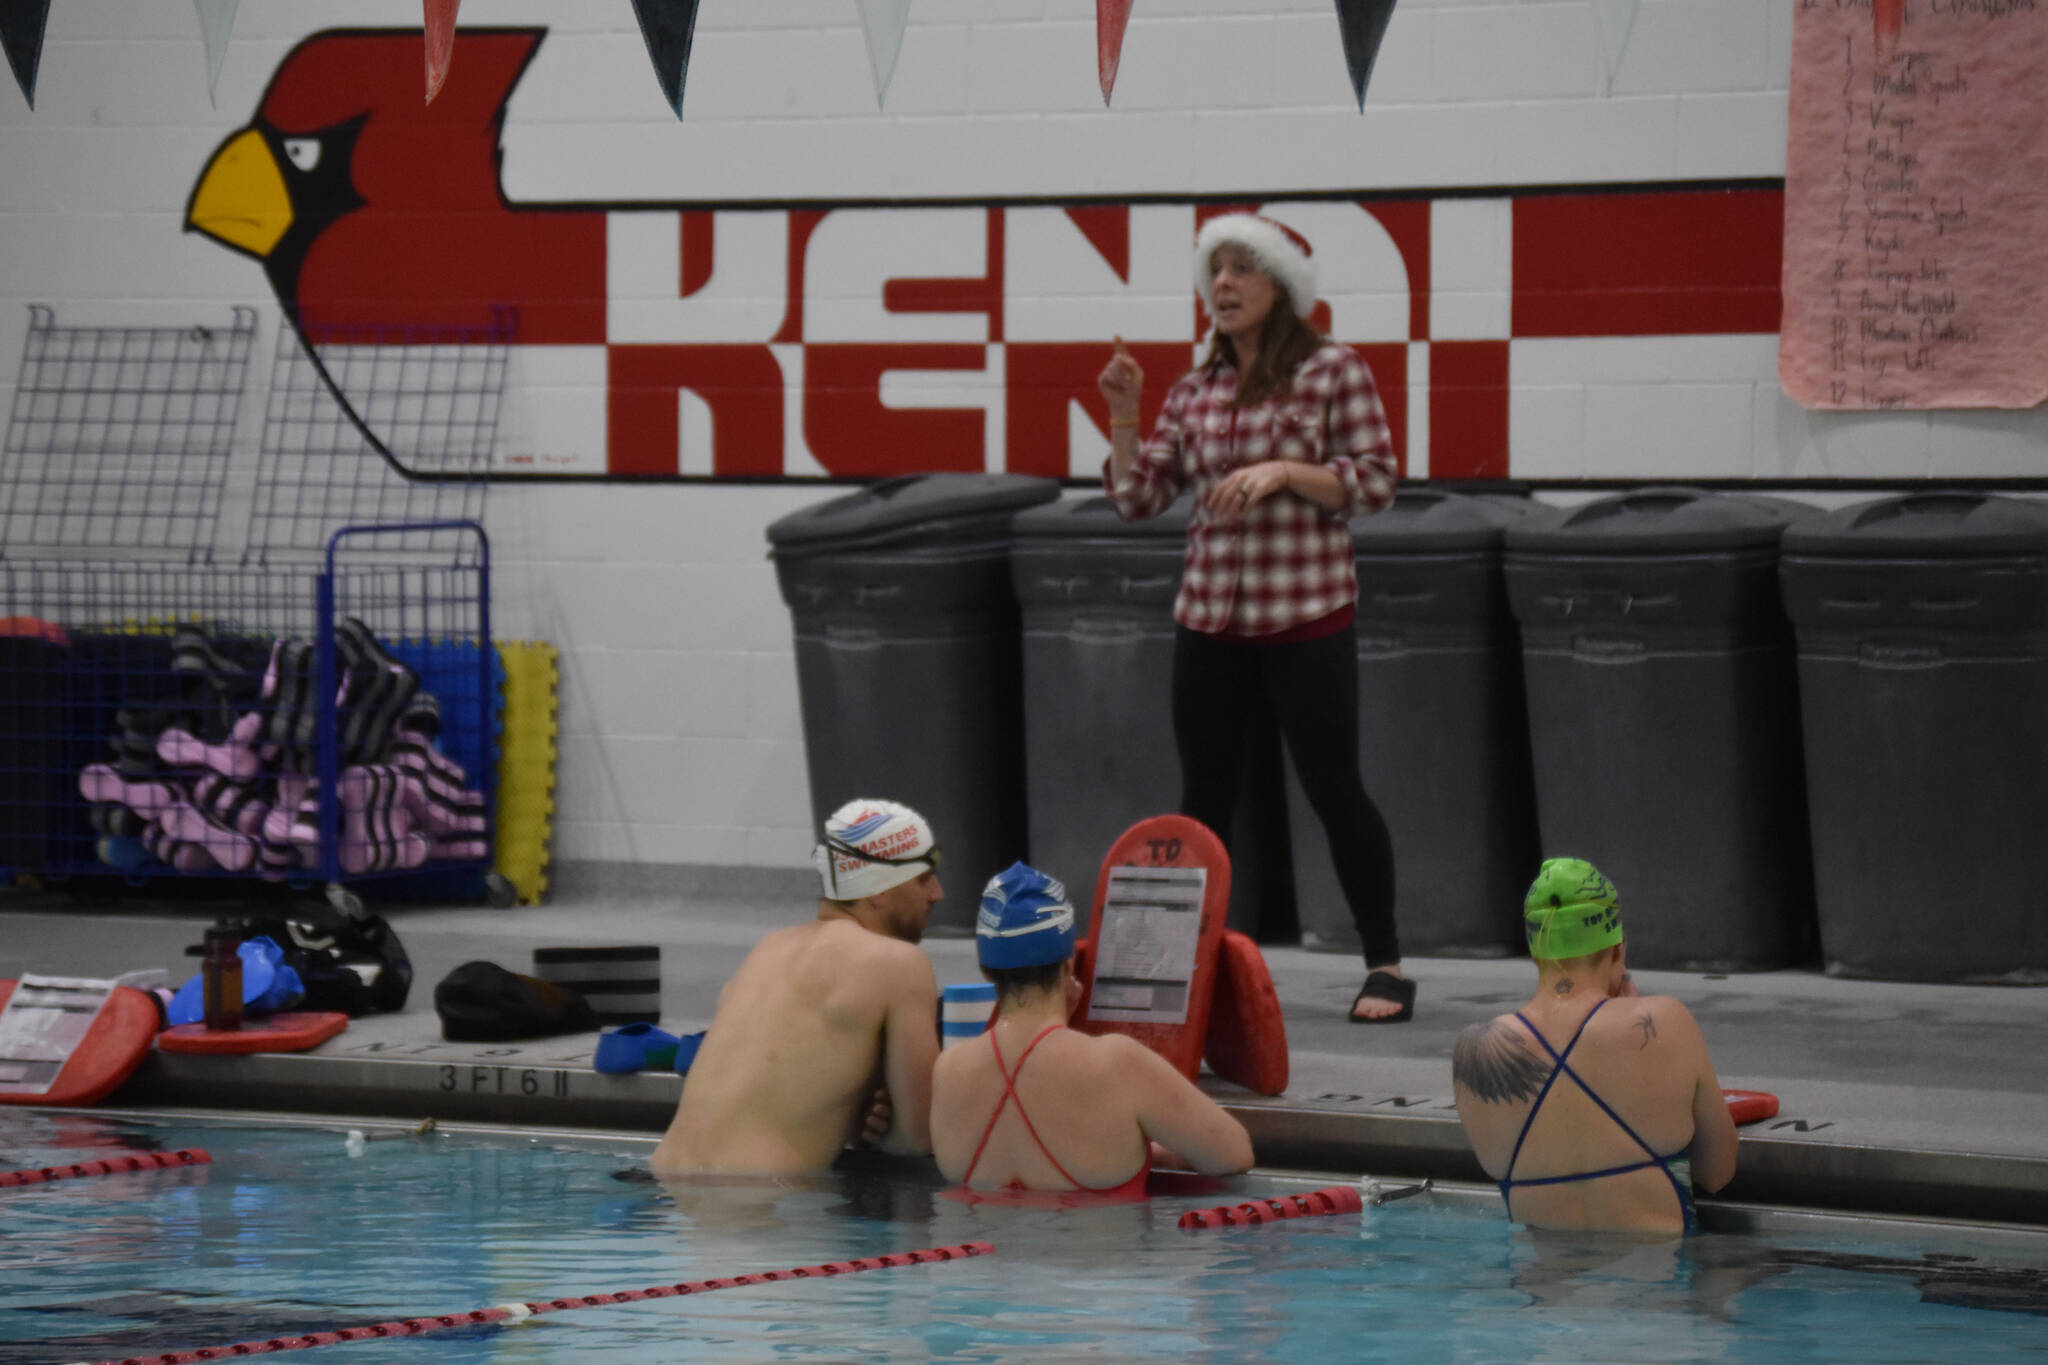 Angie Brennan directs swimmers as they prepare for a workout set during a Top of the World Swimming practice on Wednesday, Dec. 14, 2022, at Kenai Central High School in Kenai, Alaska. (Jake Dye/Peninsula Clarion)